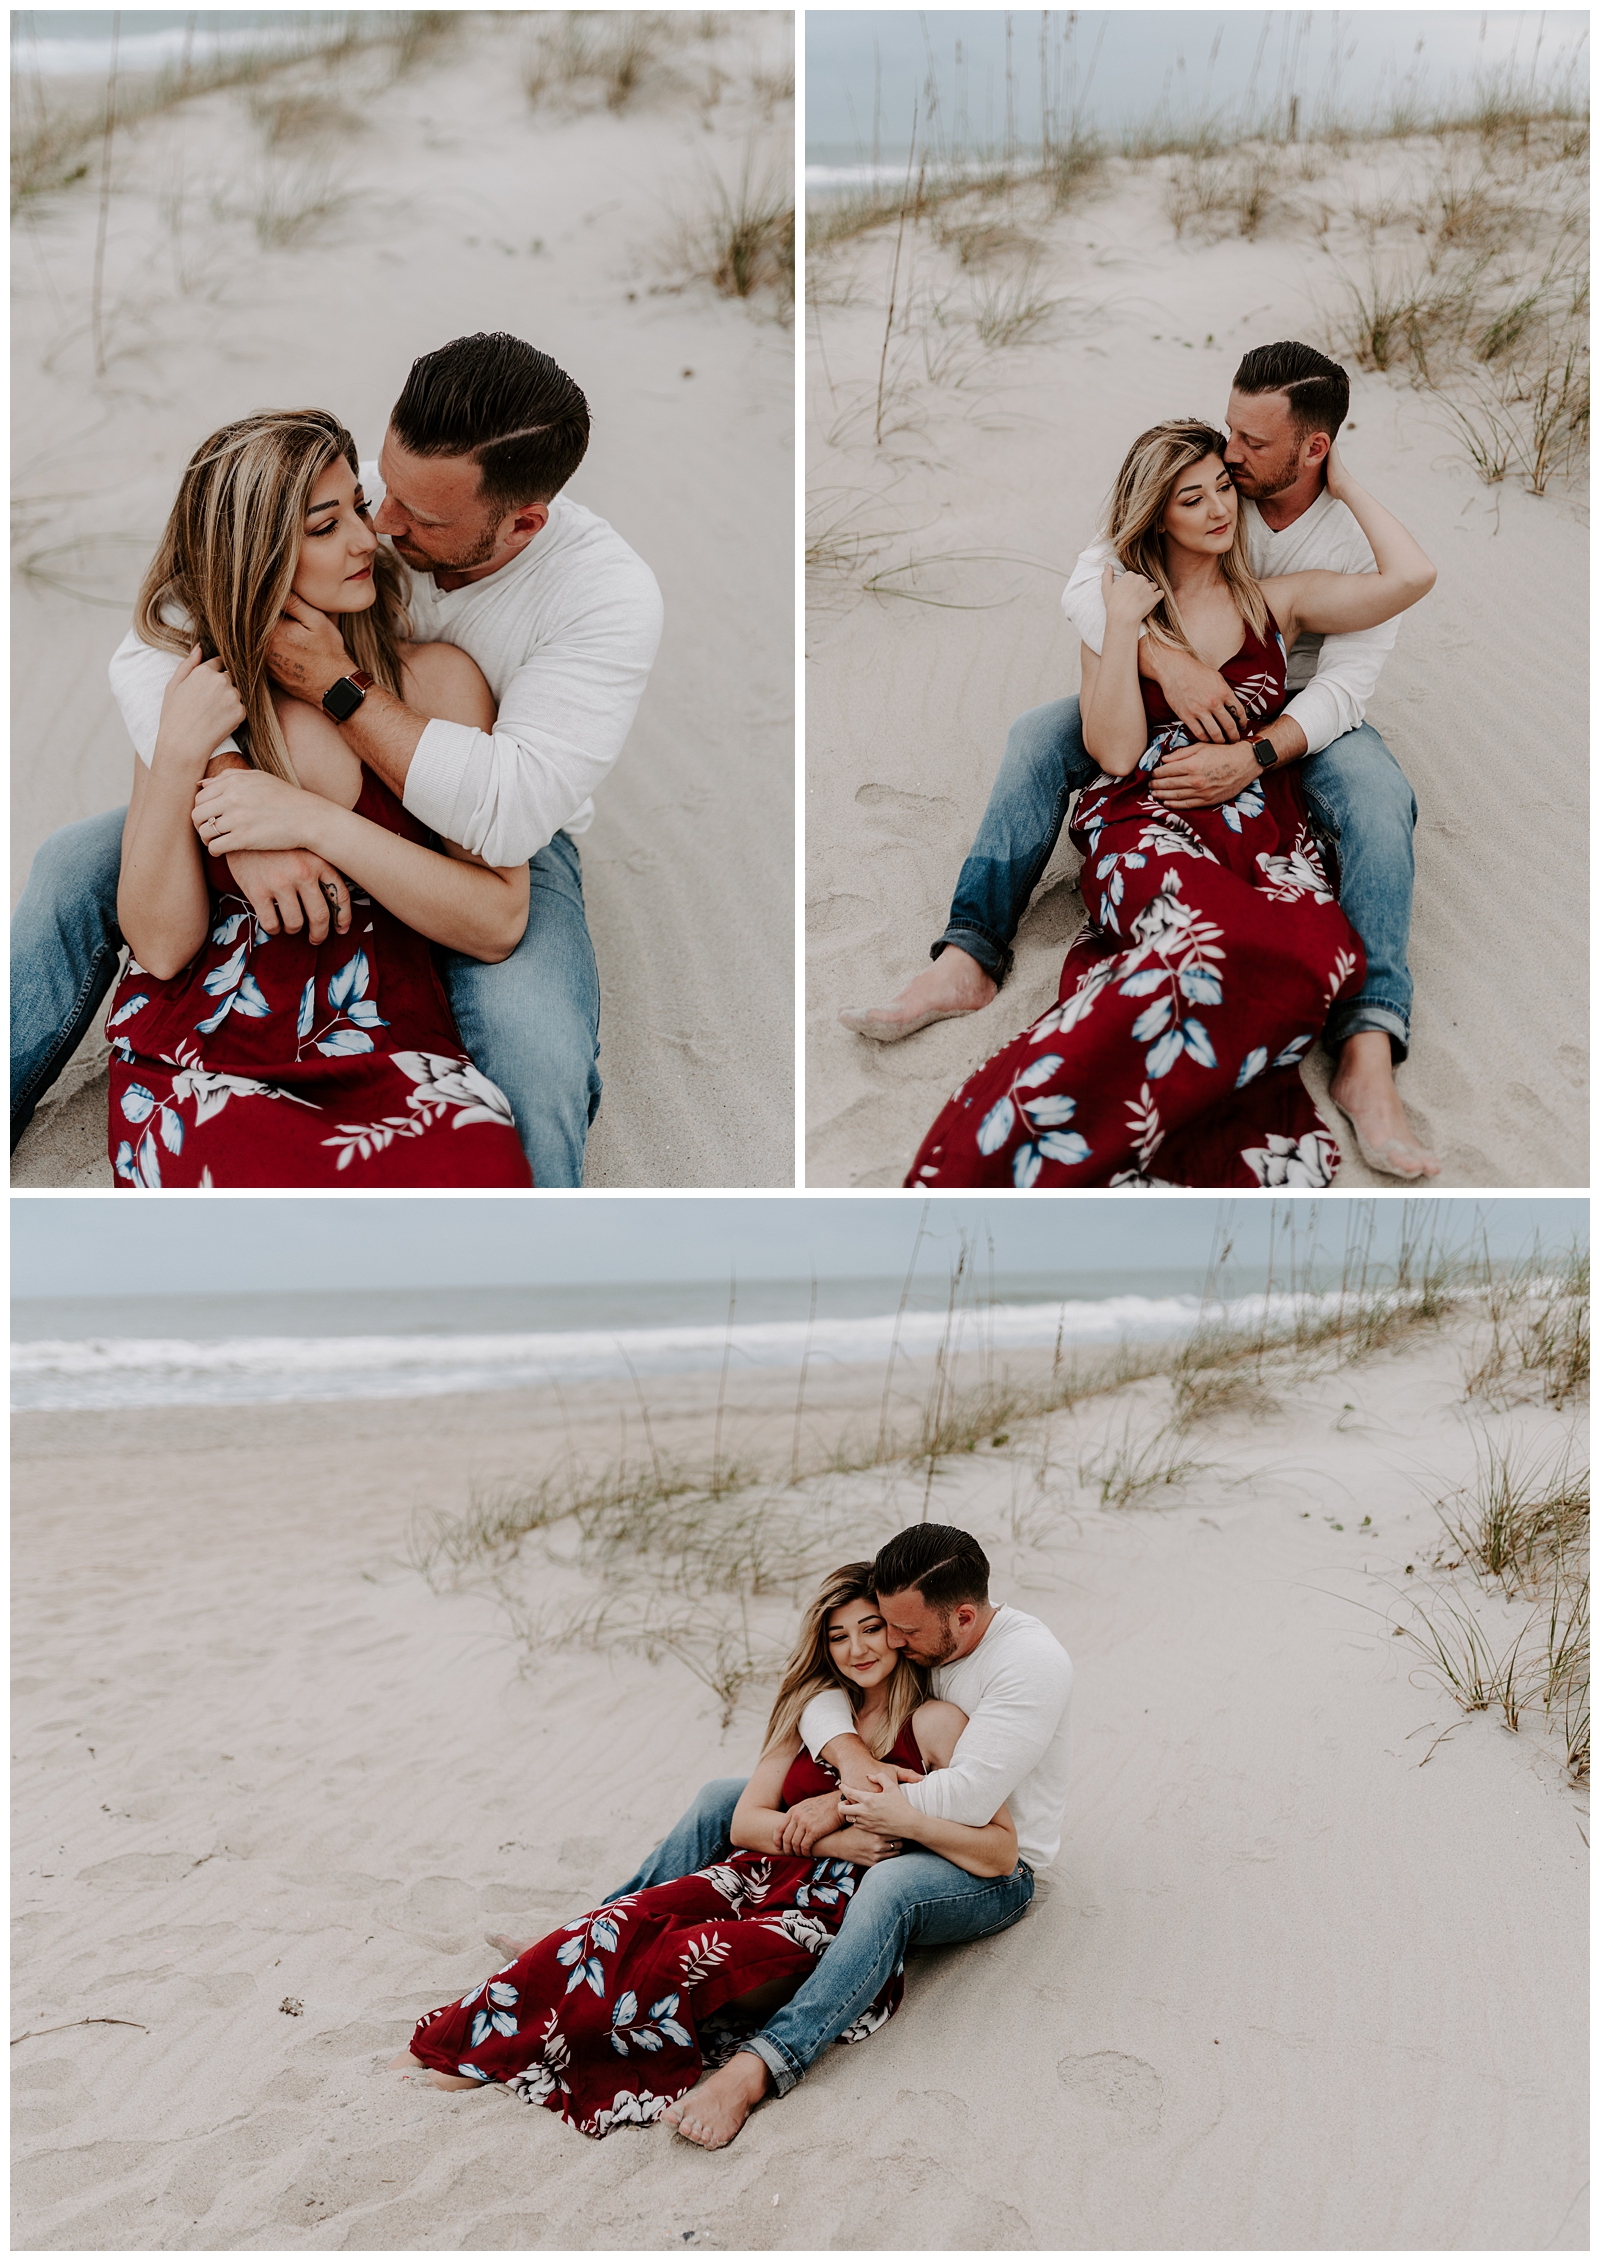 Engagement photos in front of sand dunes and ocean